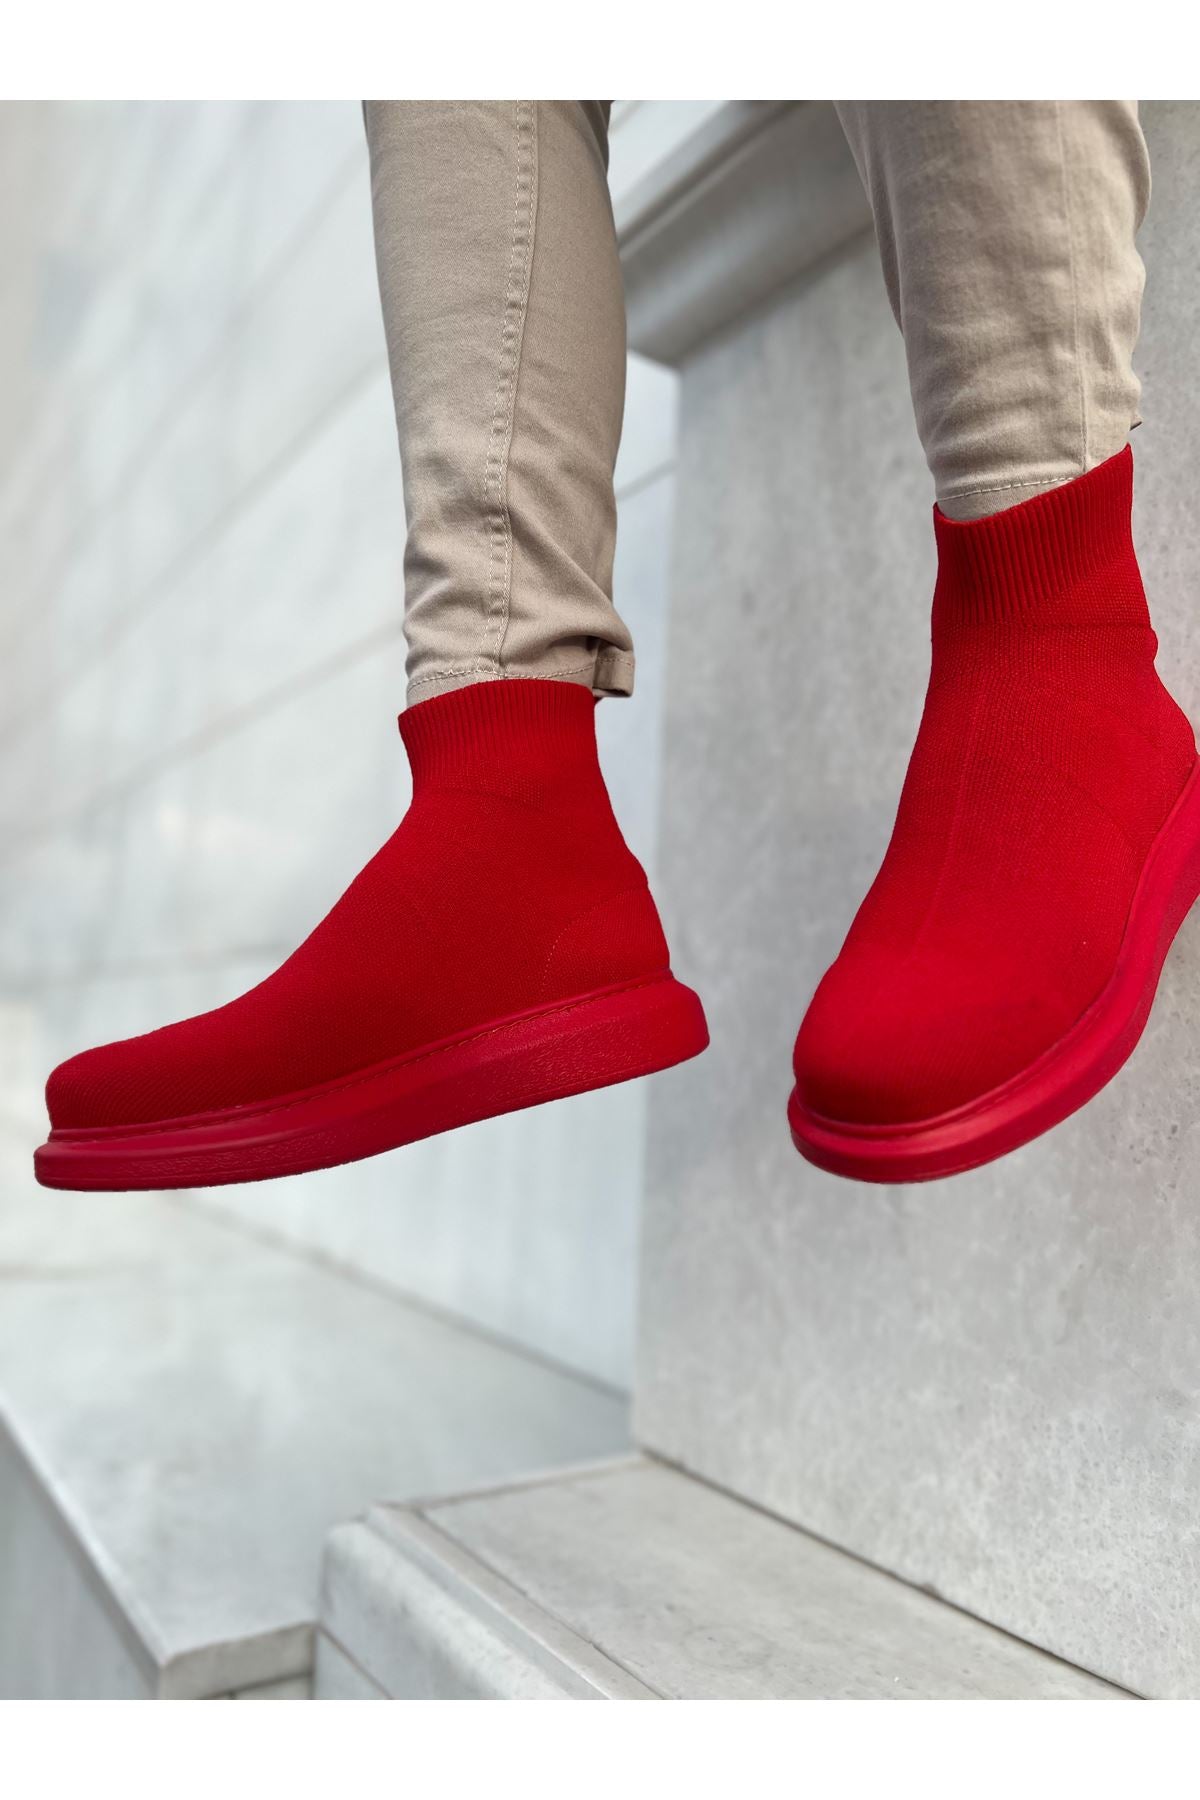 CH207 B.Knitwear RRT Men's Shoes sneakers boot RED - STREETMODE ™